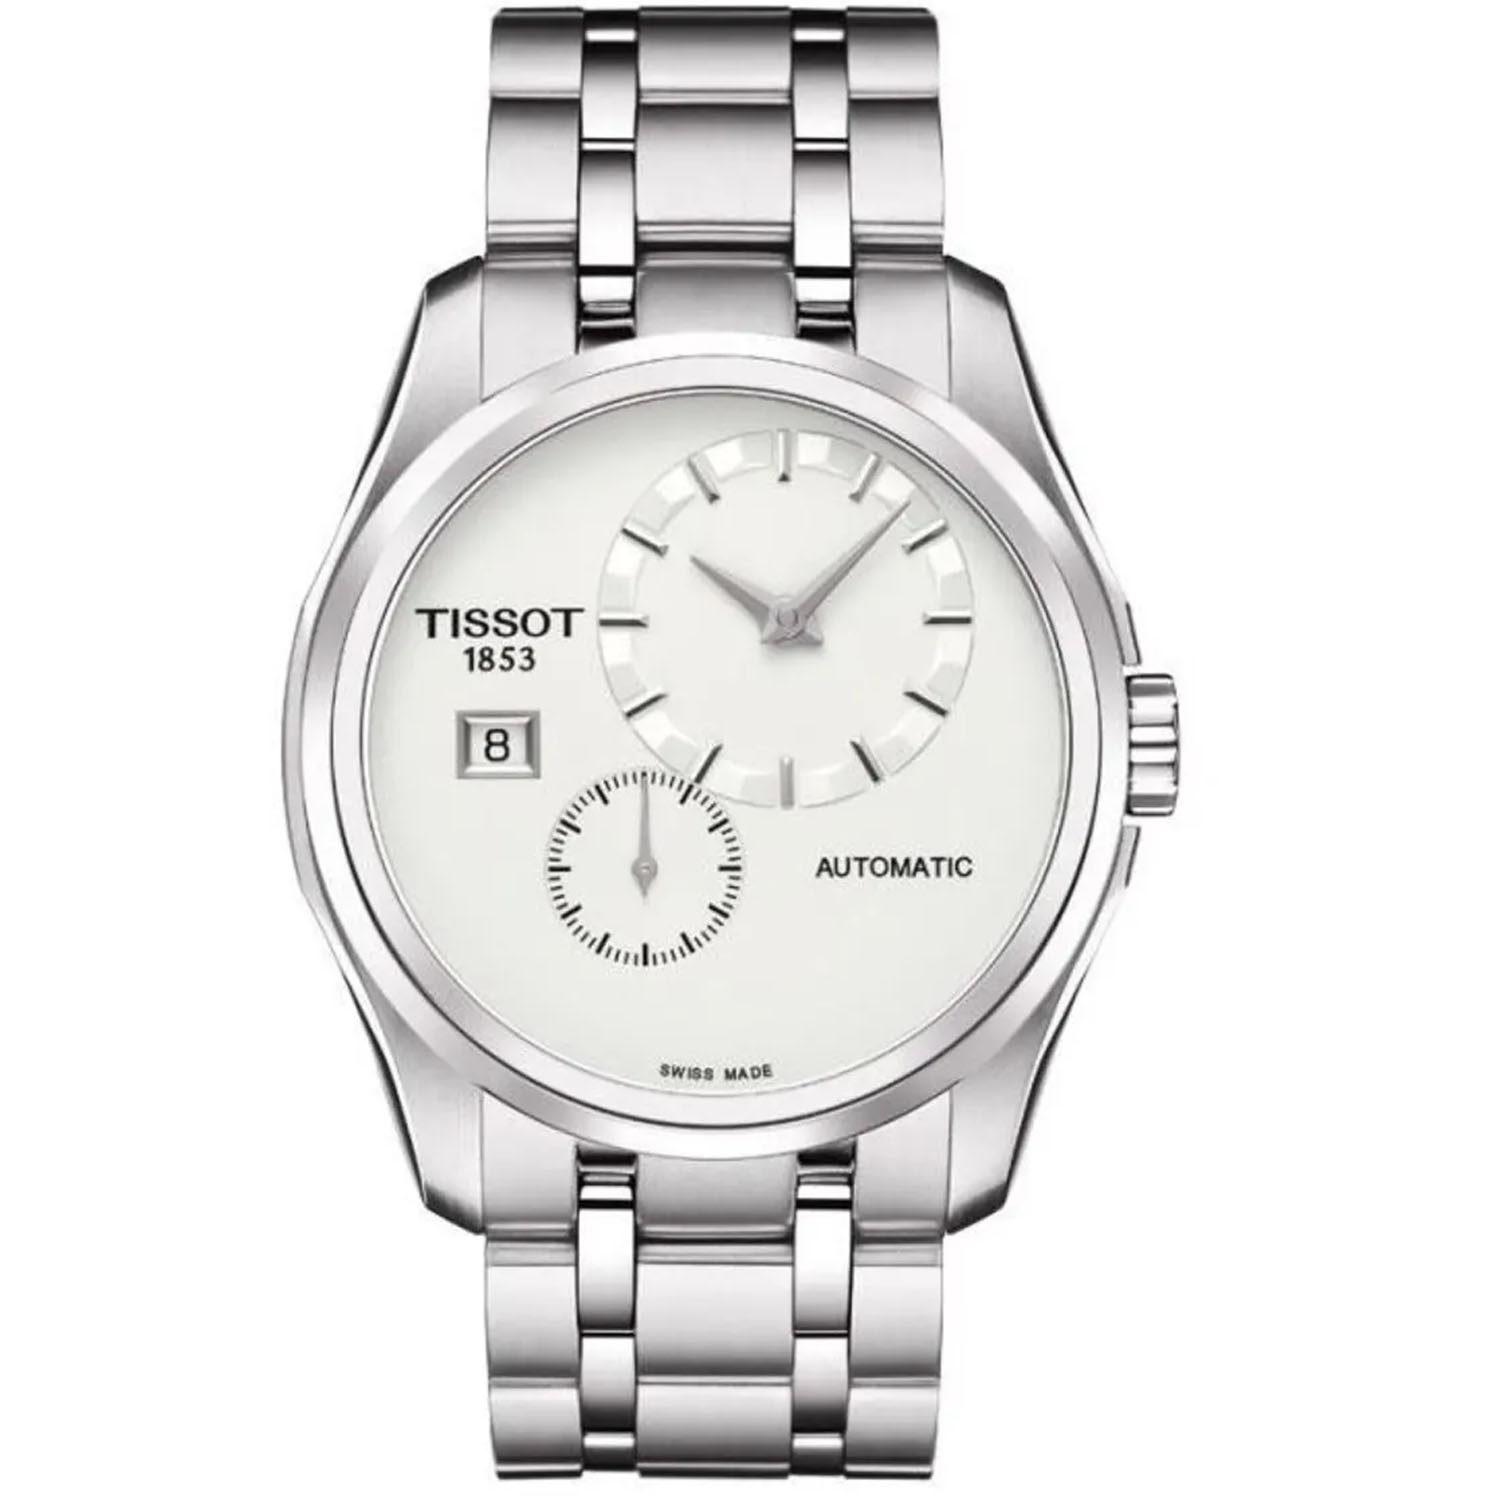 Tissot Women's Couturier White Dial Watch - T0354281103100